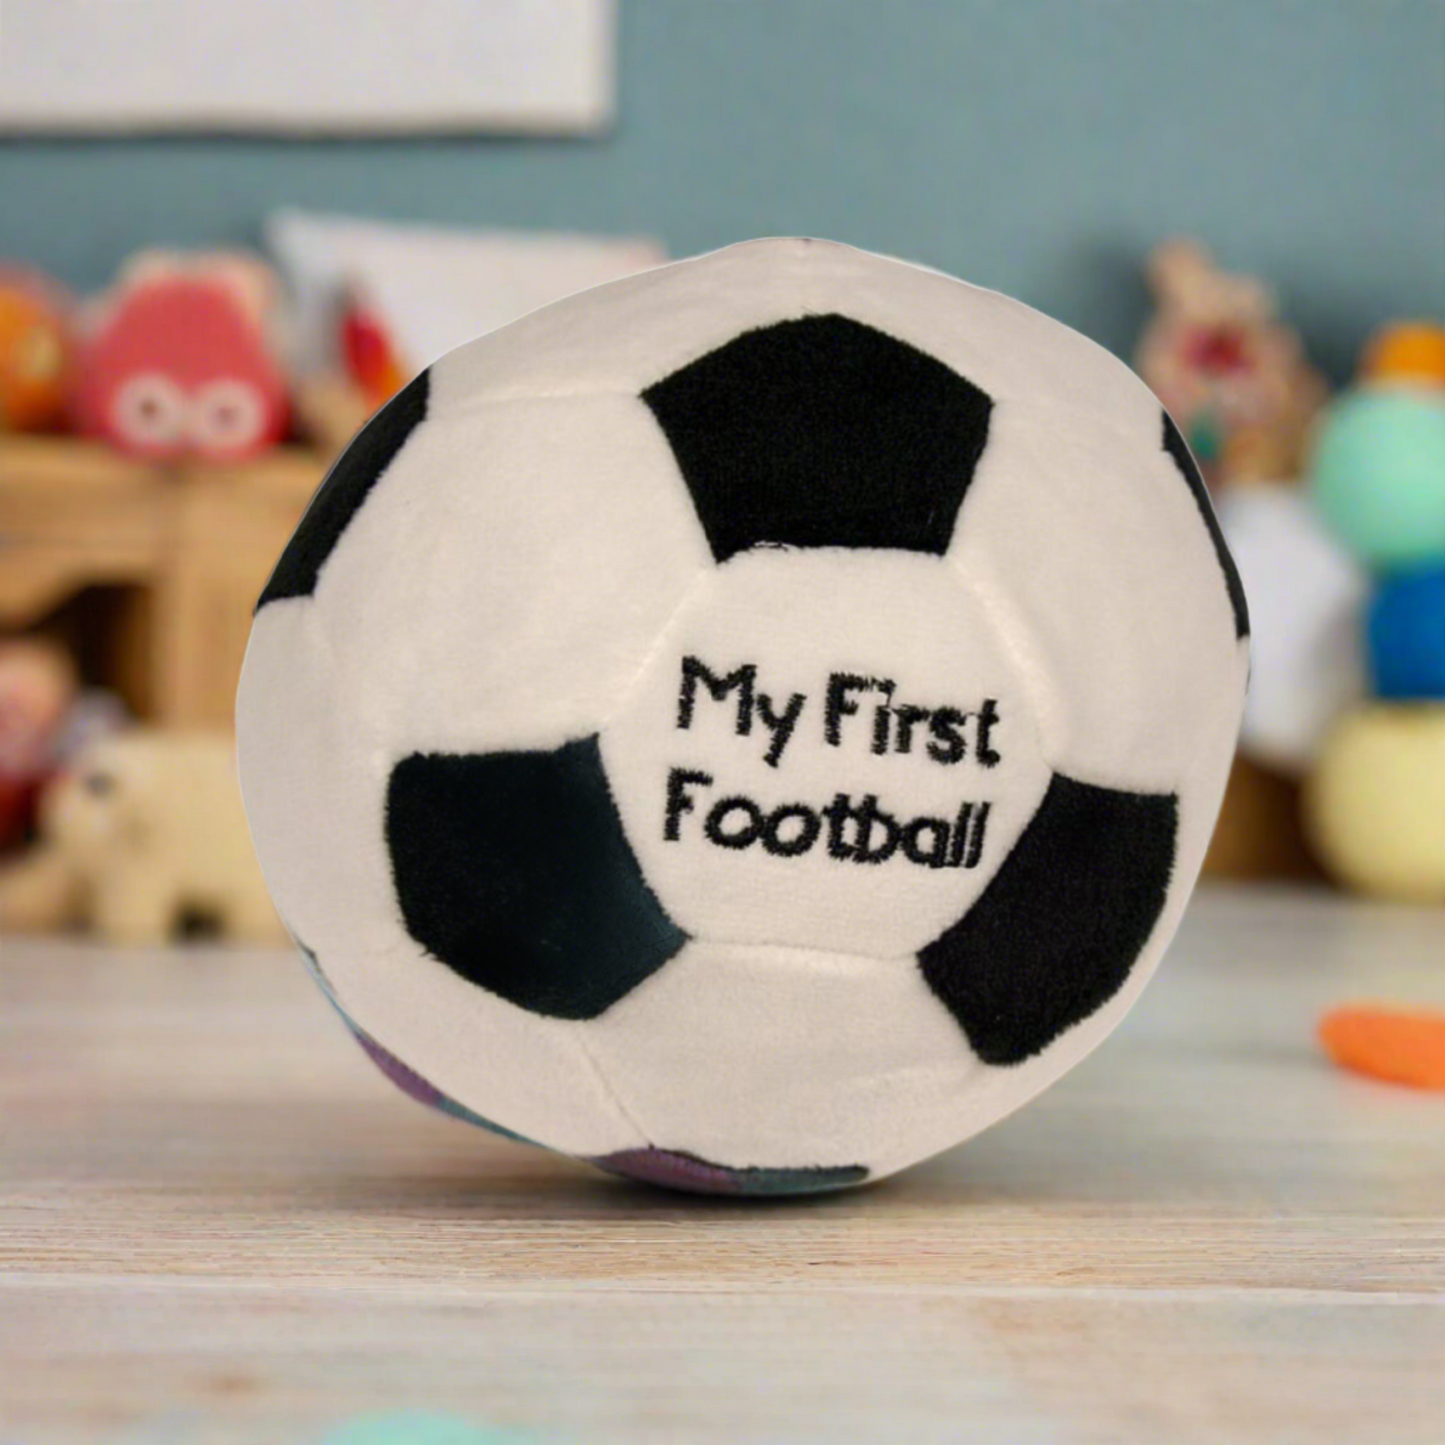 Soft baby toy, my first football. Measuring 15cm made from soft plush materials with a rattle sound within. (Featured in a a baby playroom)